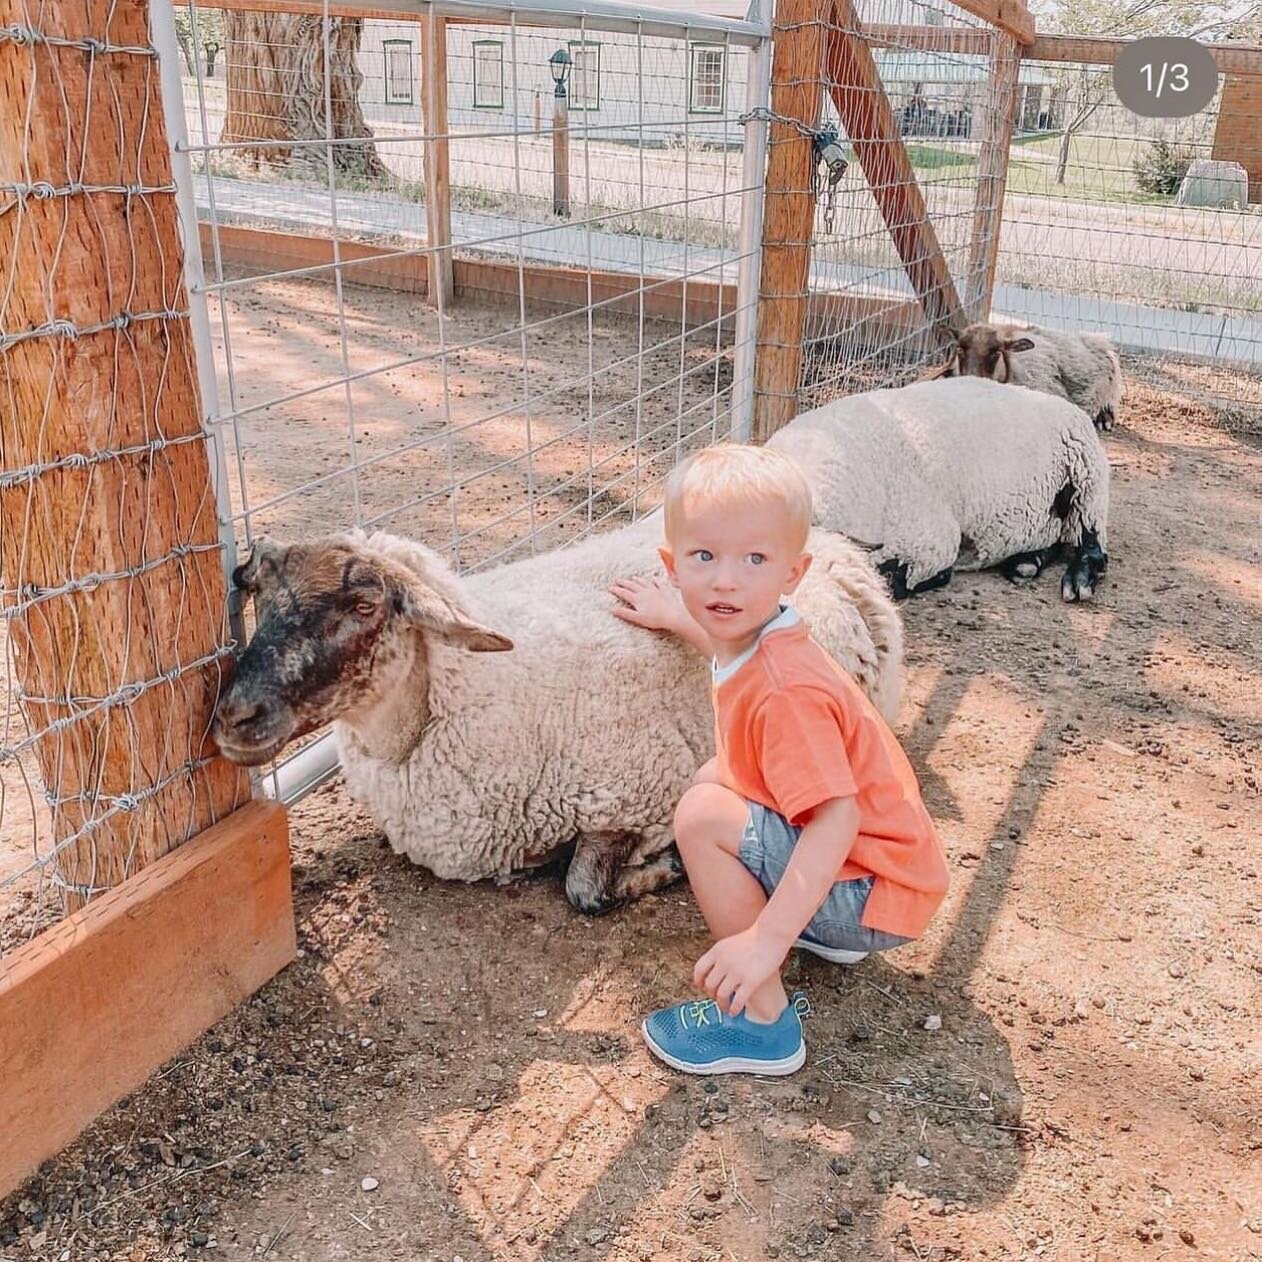 This is the Place to make friends 🐐✨Have you visited our petting corral? It&rsquo;s a great place to make new friends 🙌🏻 both animal and human 😆🤍

#utahgram #utahstateparks #thisistheplace #utahfamily #utahfriends #utahhistory #utahfunactivities